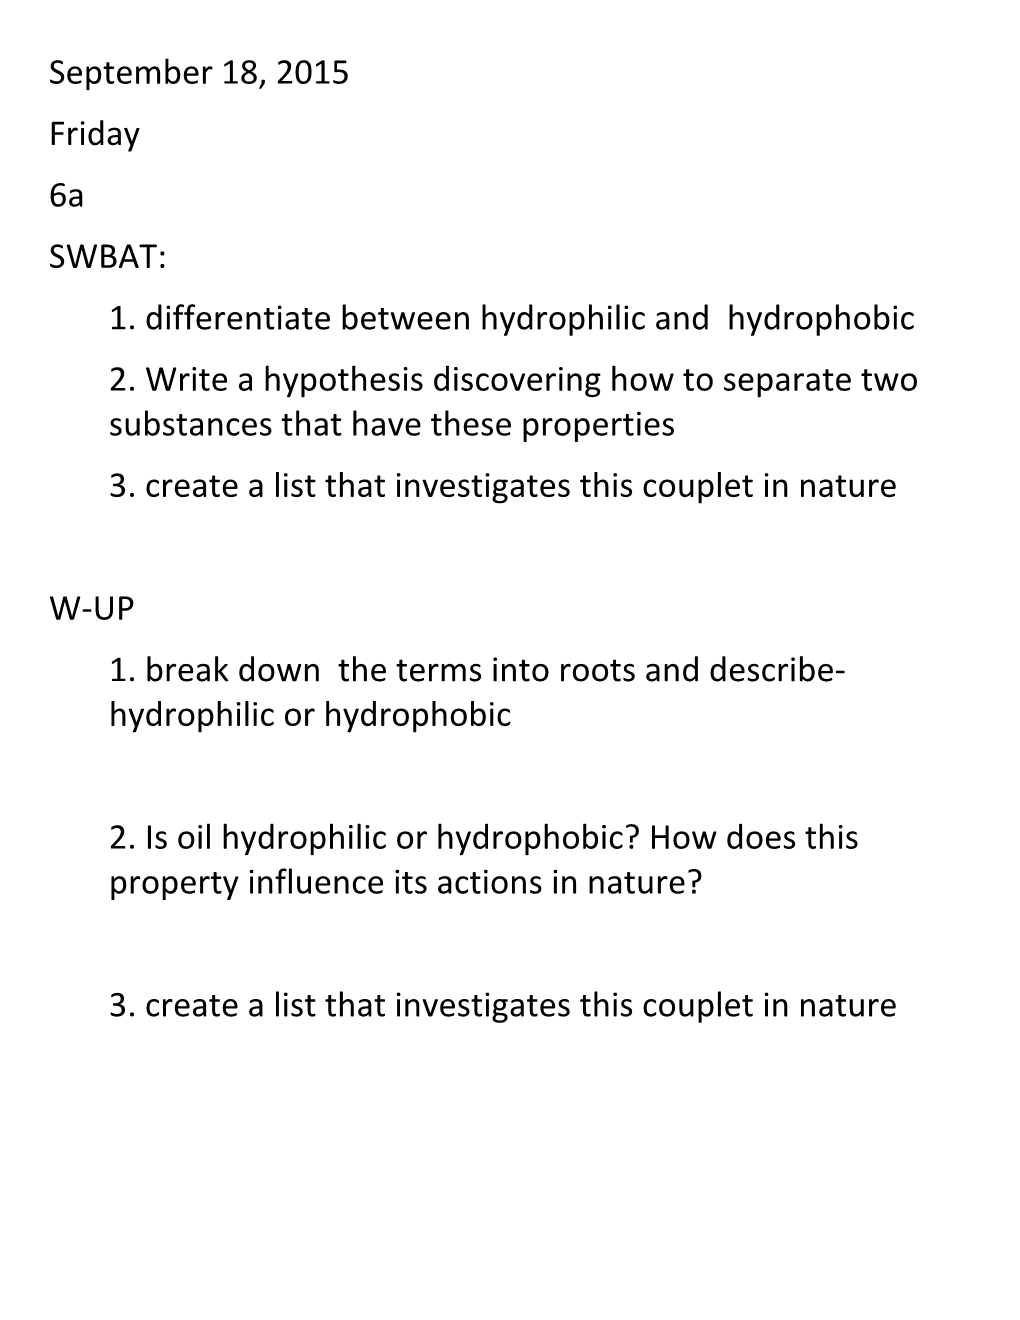 1. Differentiate Between Hydrophilic and Hydrophobic